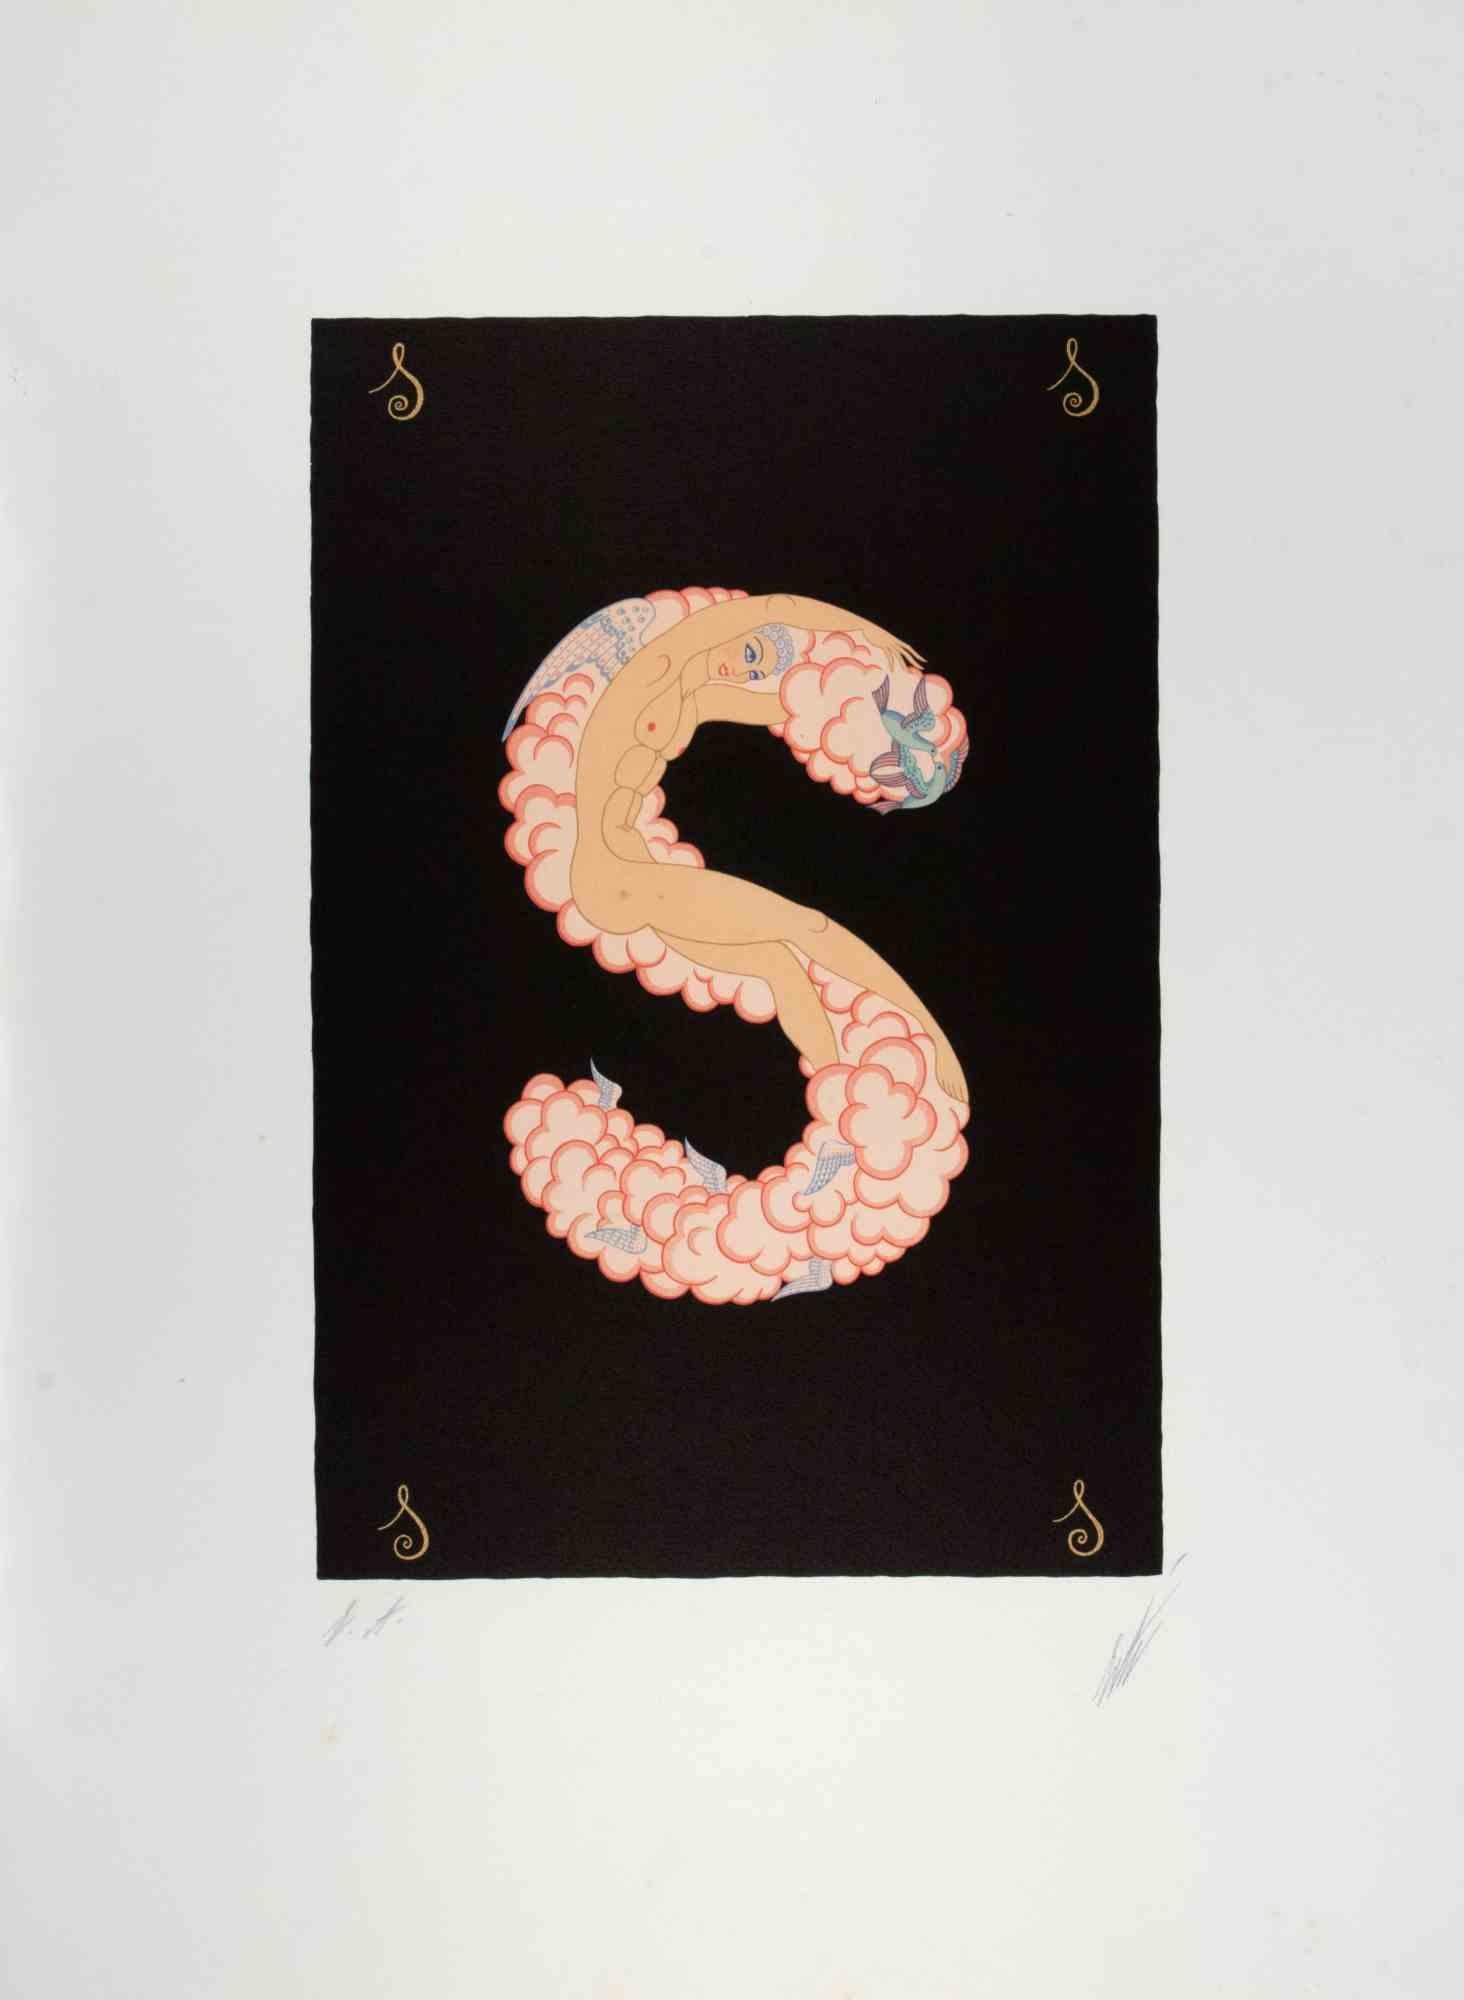 Letter S - from the suite Letters of the Alphabet is a contemporary artwork realized by Erté (Romain de Tirtoff).

Lithograph and Screen Print.

The artwork is from the suite "Letters of the Alphabet", 1976.

Hand signed on the lower margin. Artist